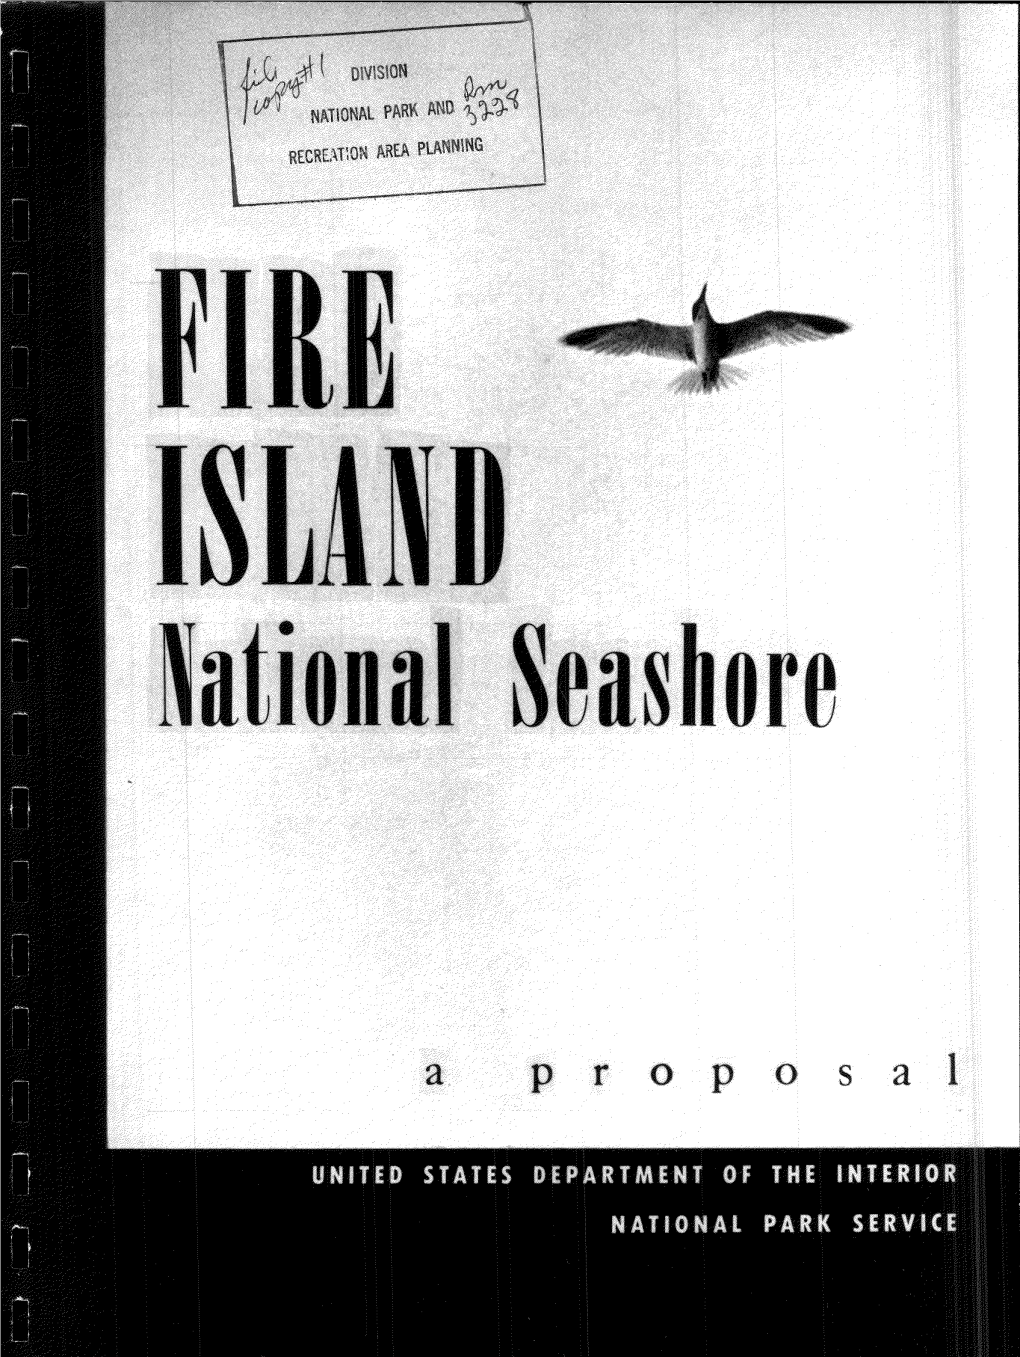 Supplementary Report on Proposed Fire Island